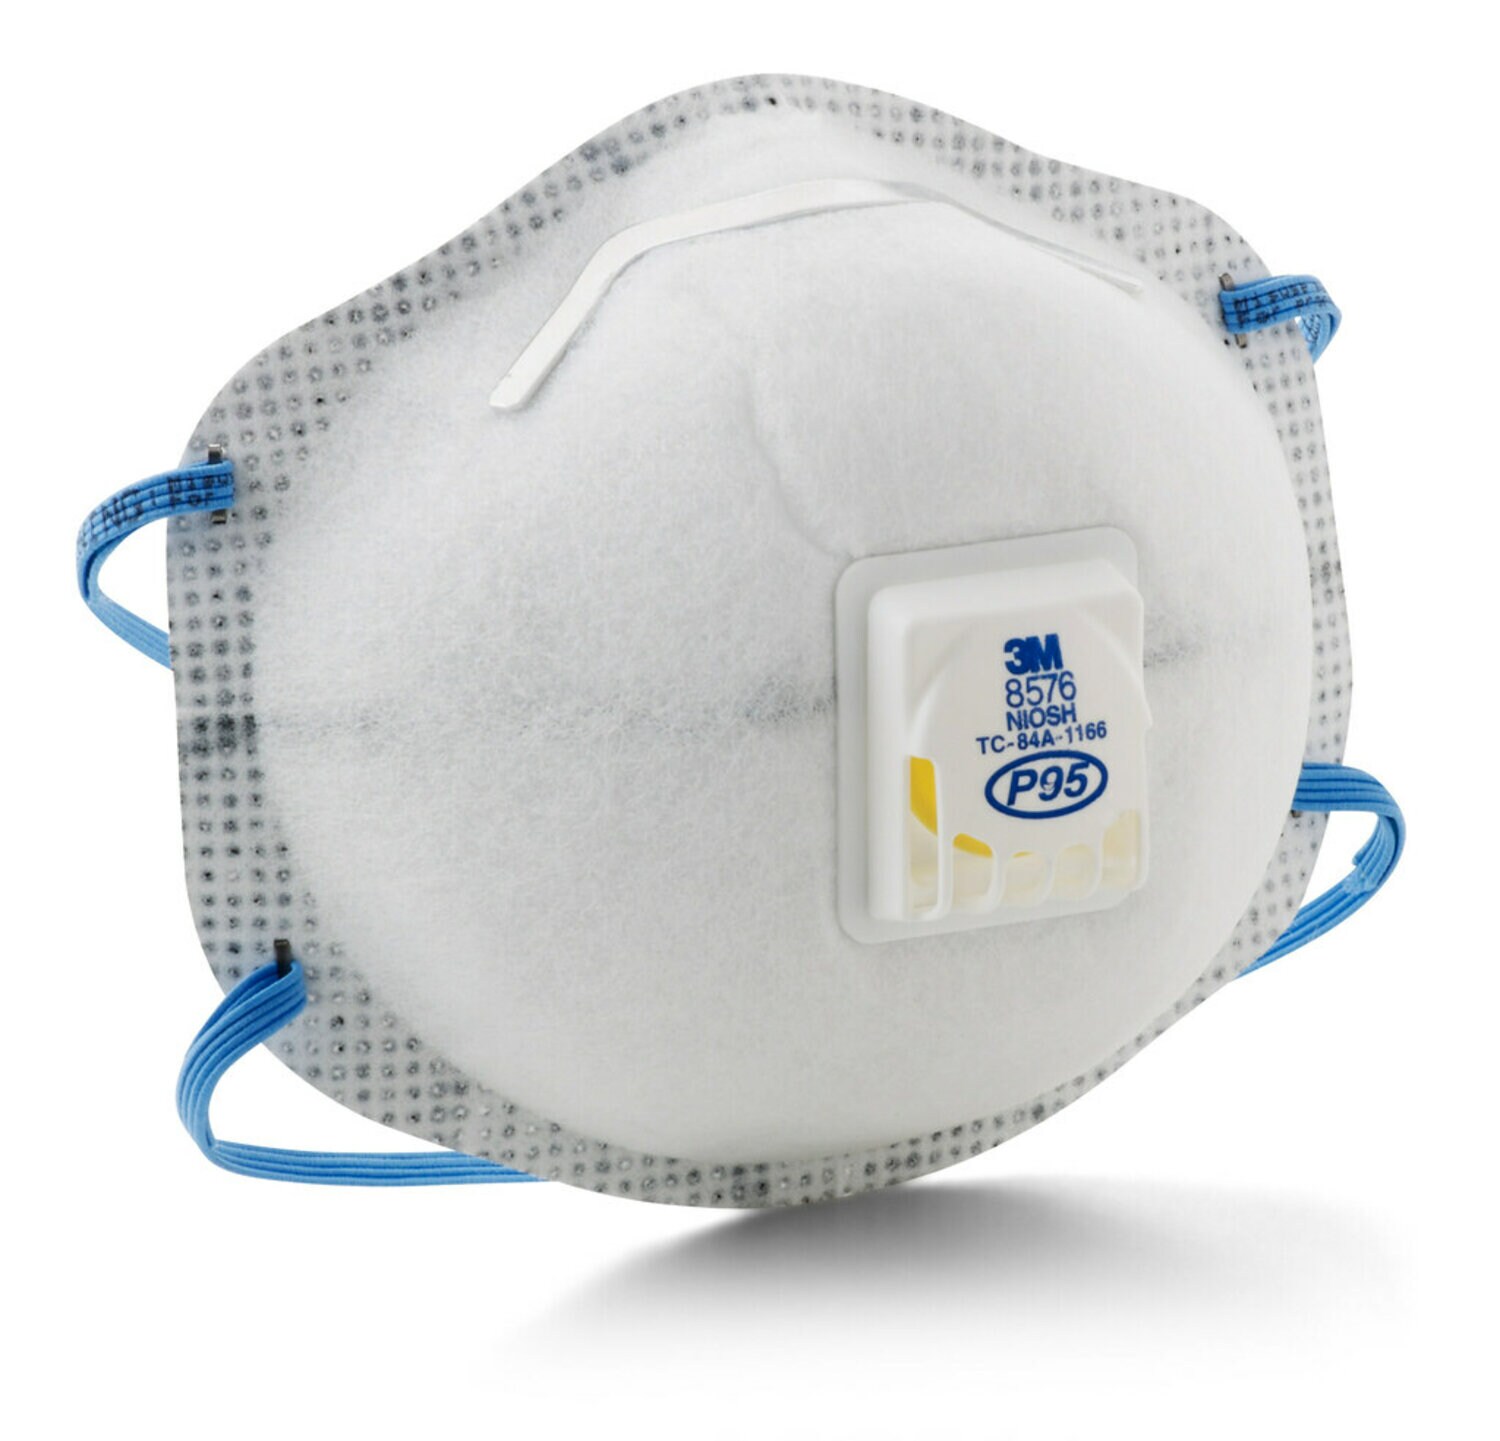 7000002061 - 3M Particulate Respirator 8576, P95, with Nuisance Level Acid Gas Relief, 80 ea/Case